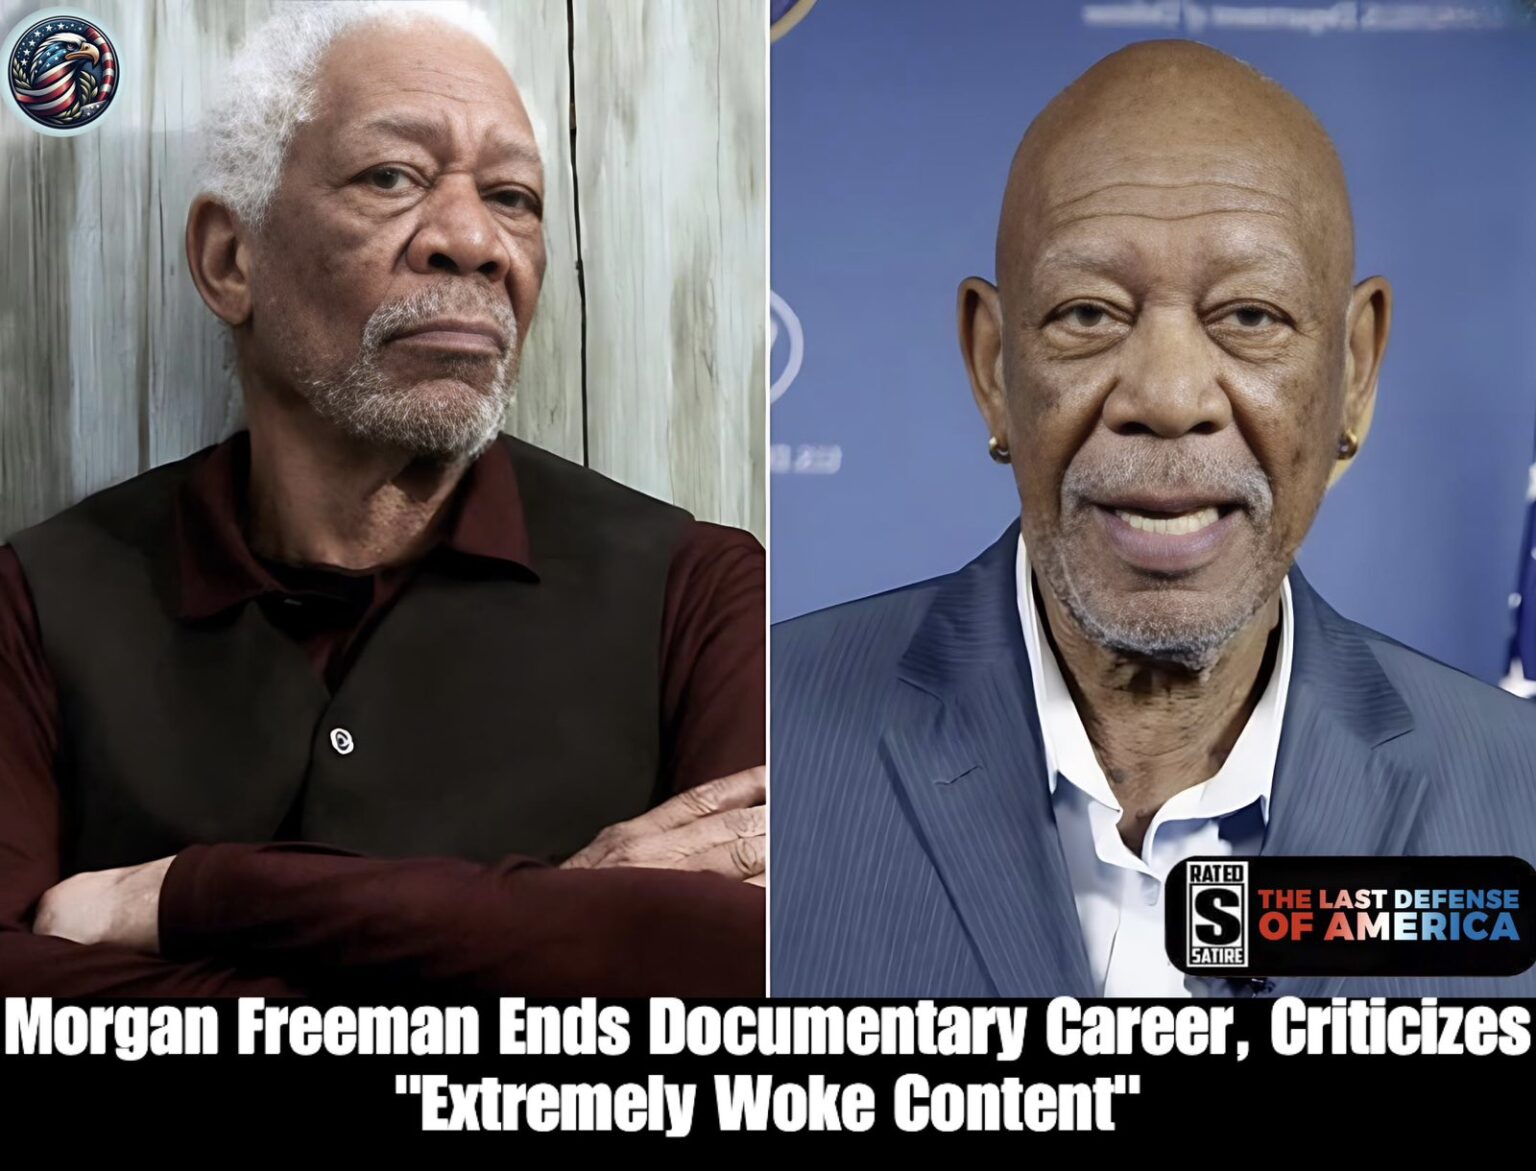 Morgan Freeman Ends Documentary Career, Criticizes “Extremely Woke Content”